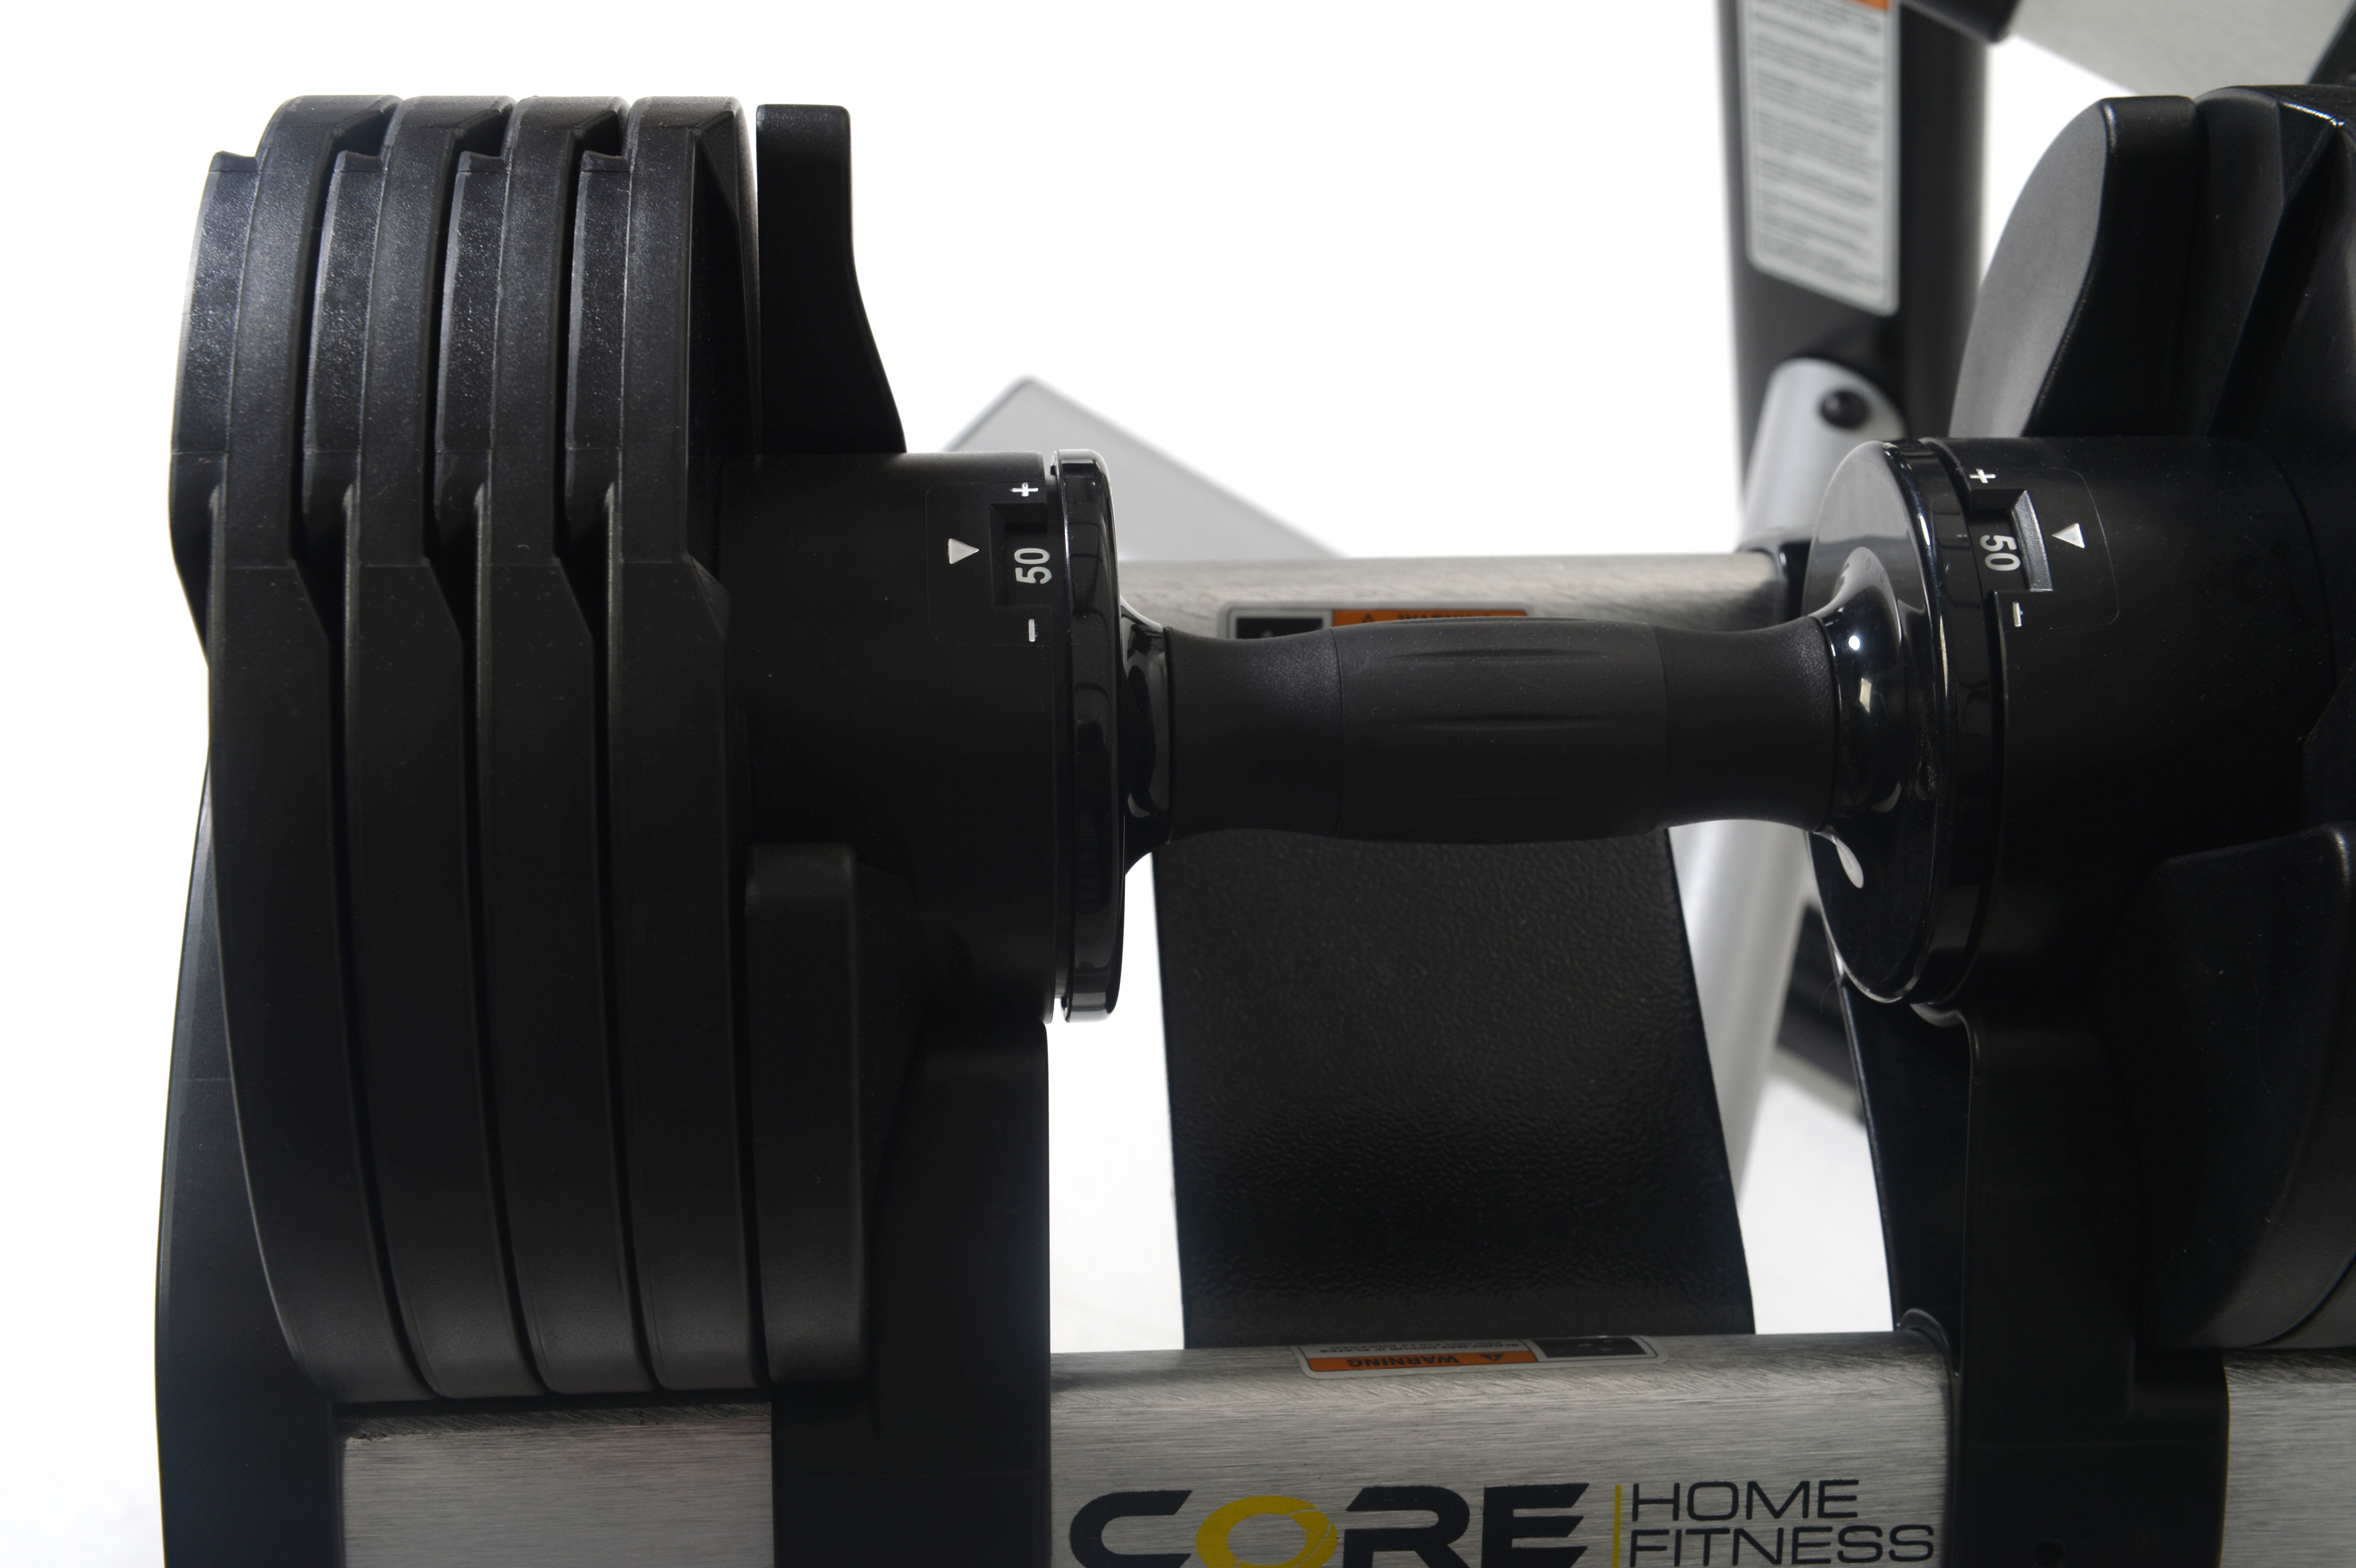 Core Home Fitness Adjustable Dumbbell Pair 5-50 Lbs. - image 3 of 6